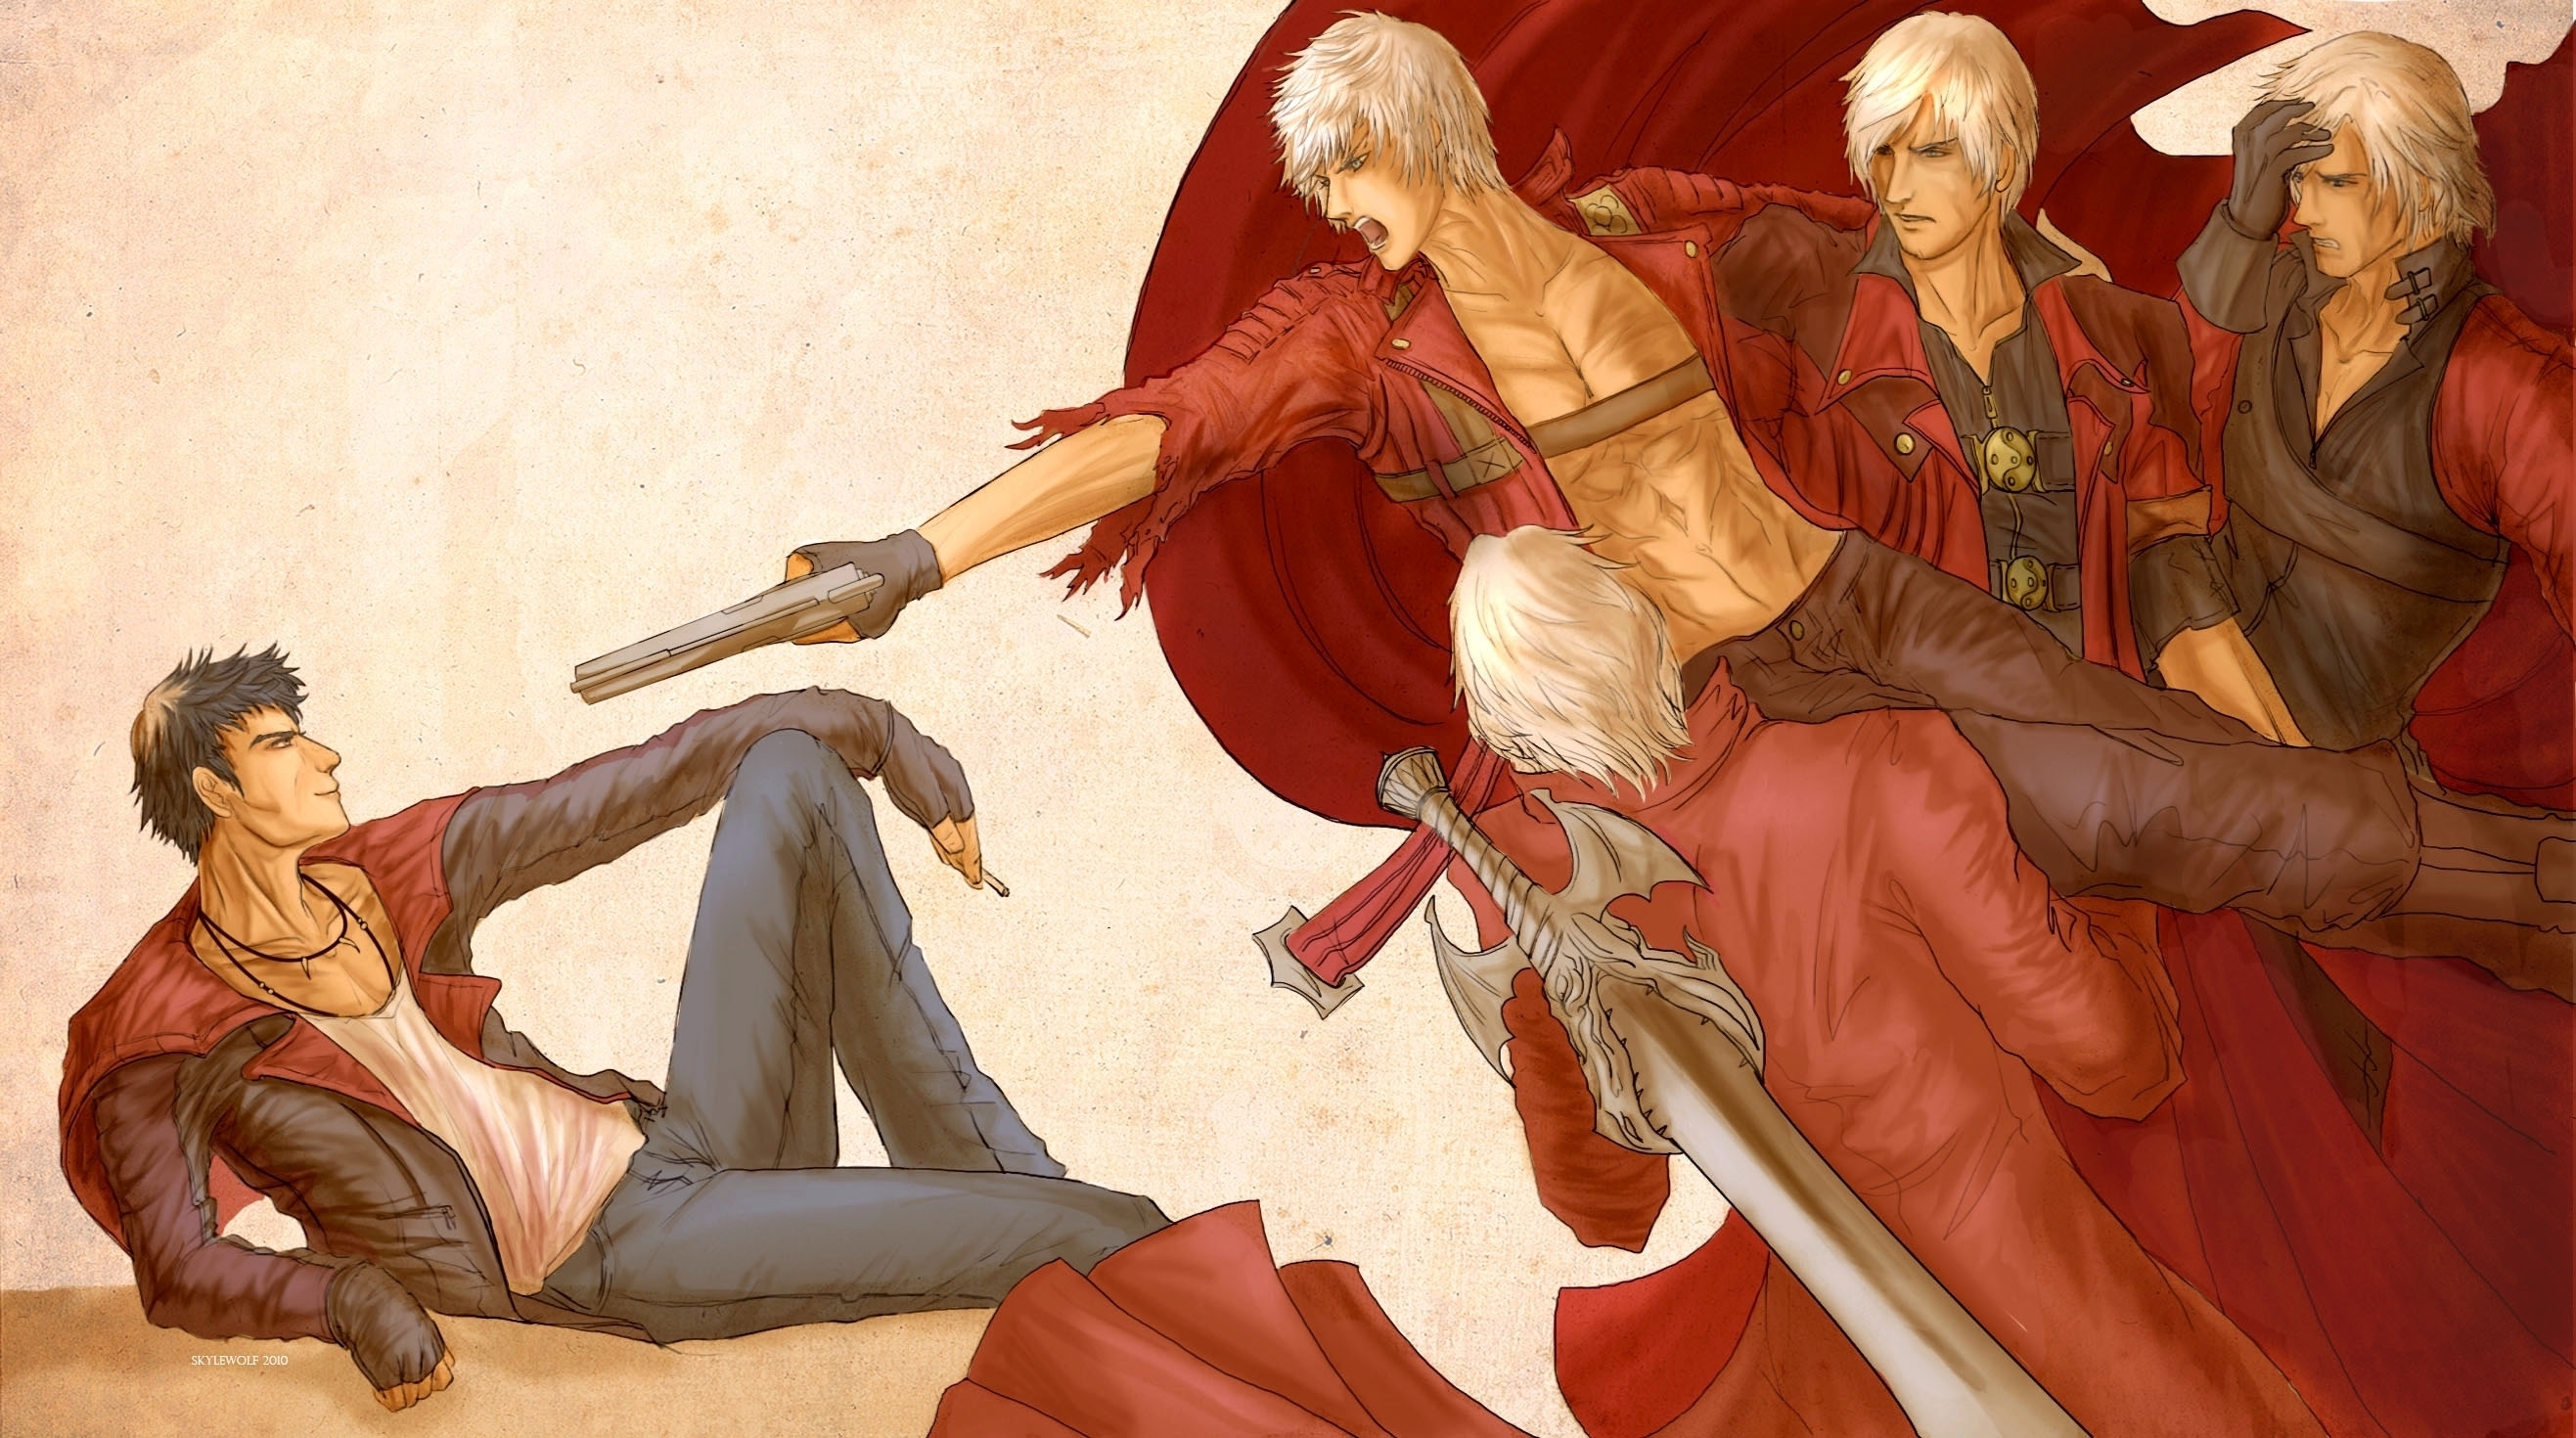 98 Devil May Cry HD Wallpapers | Backgrounds - Wallpaper Abyss